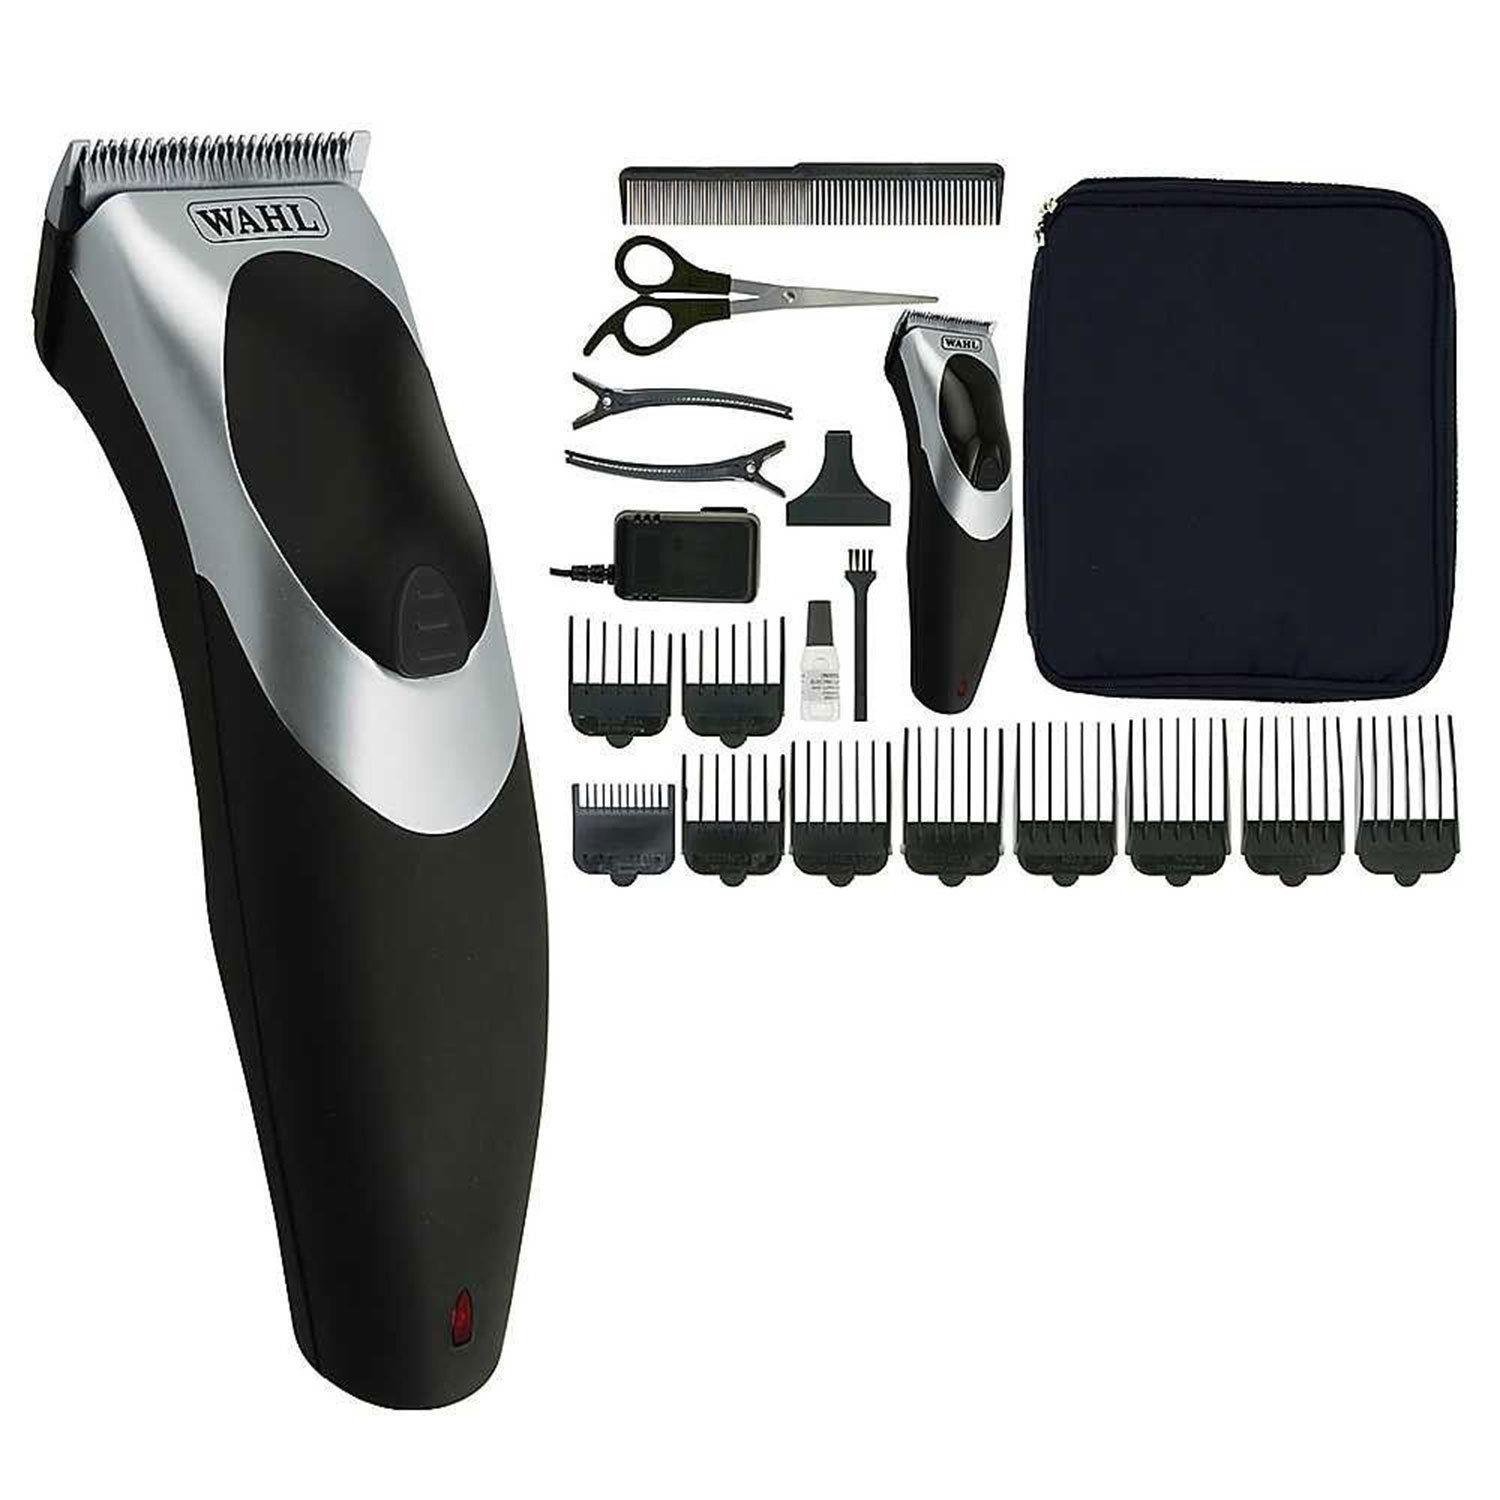 wahl clip and rinse cordless clipper